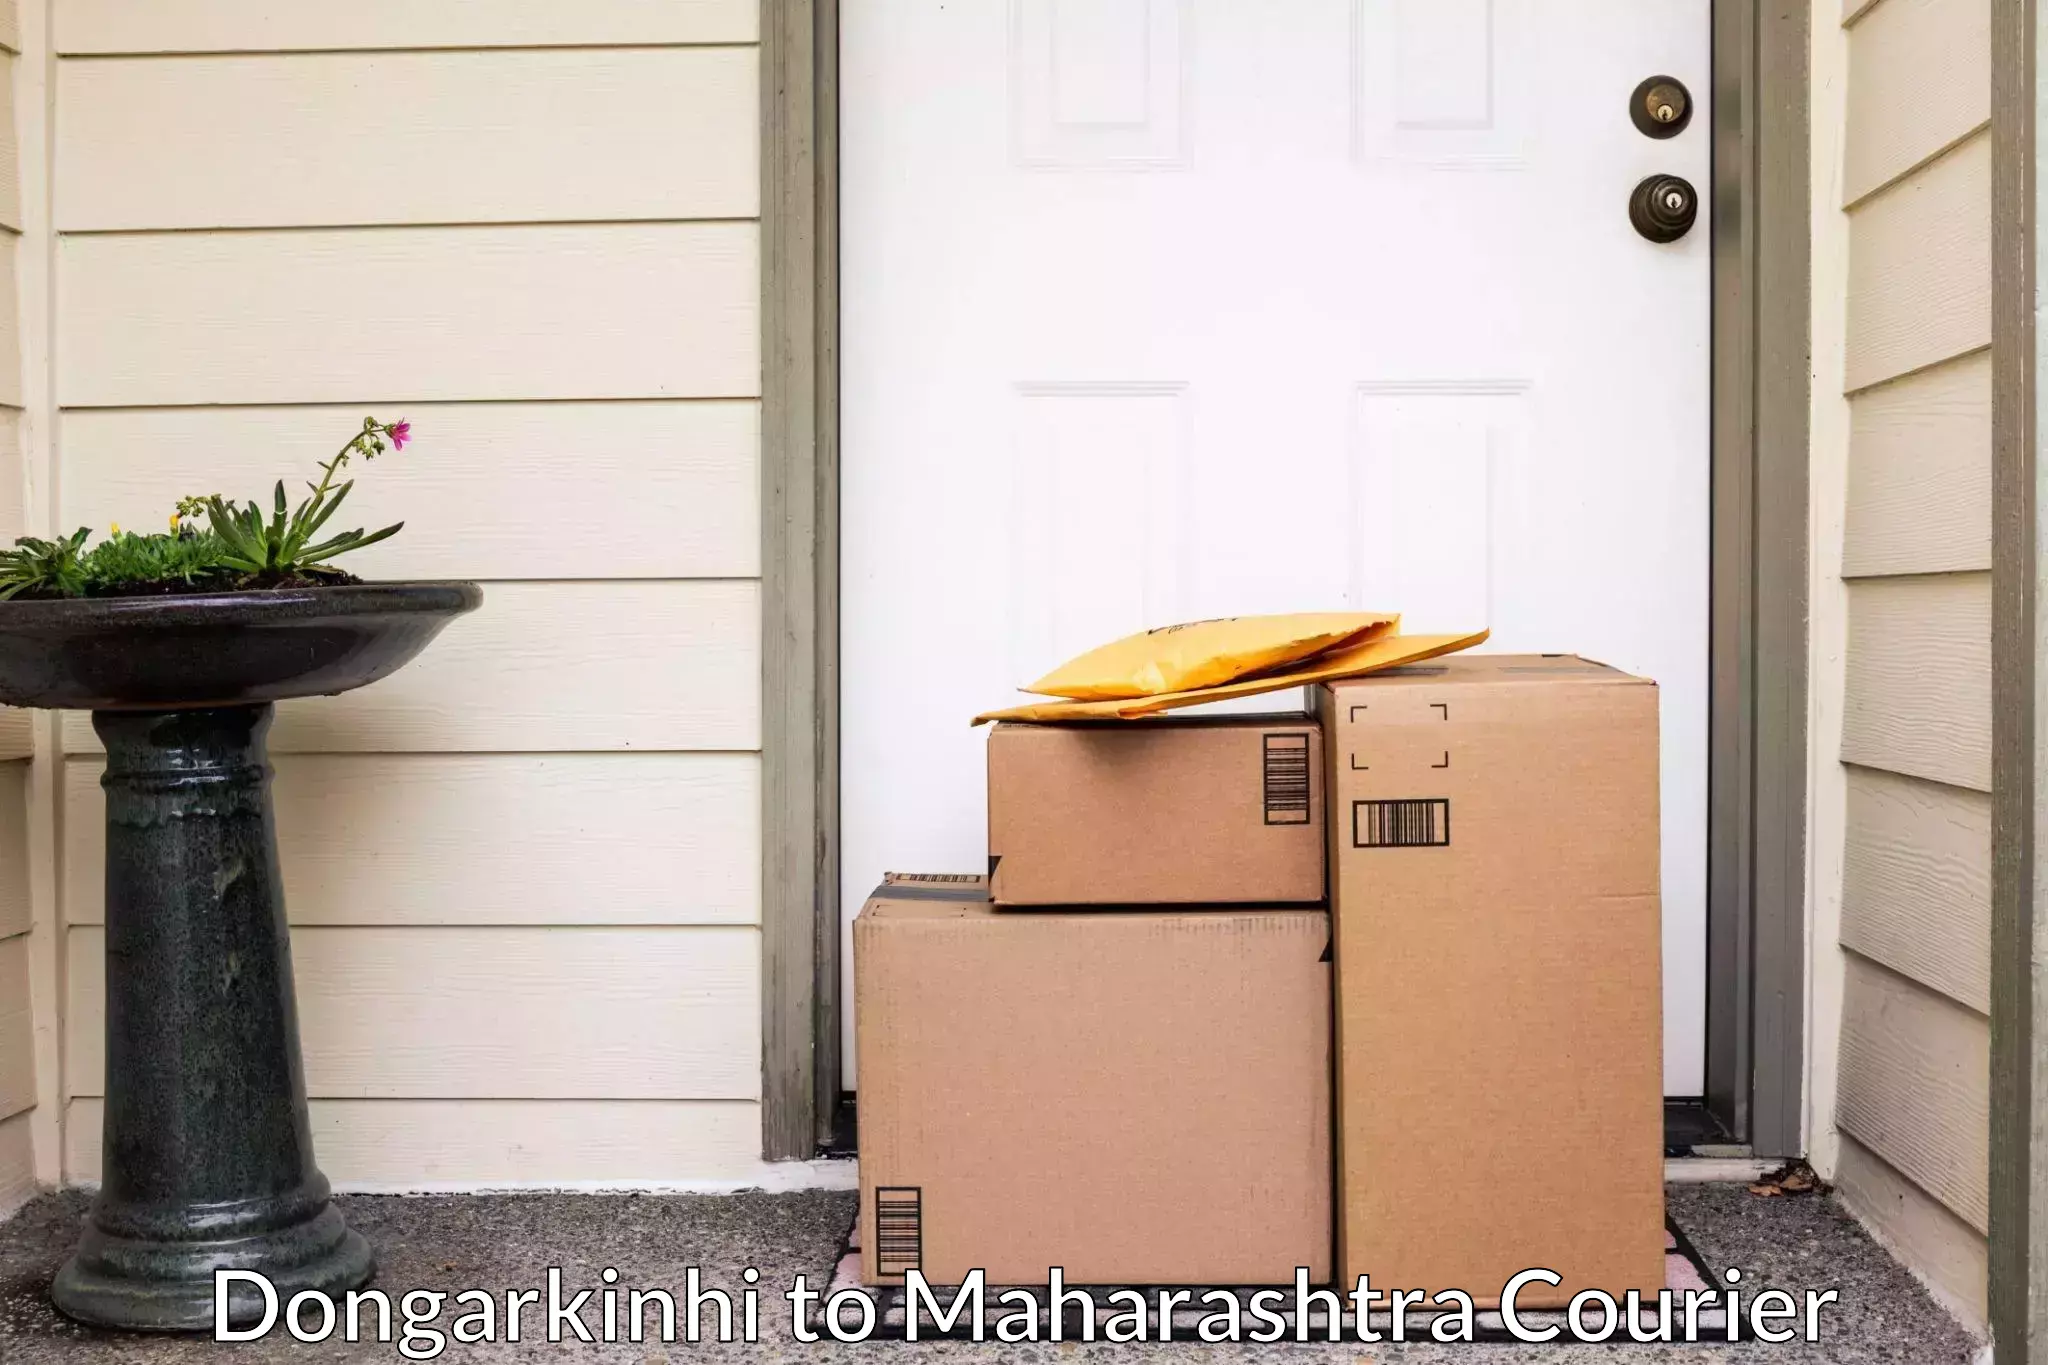 Quality moving services Dongarkinhi to Gondpipri